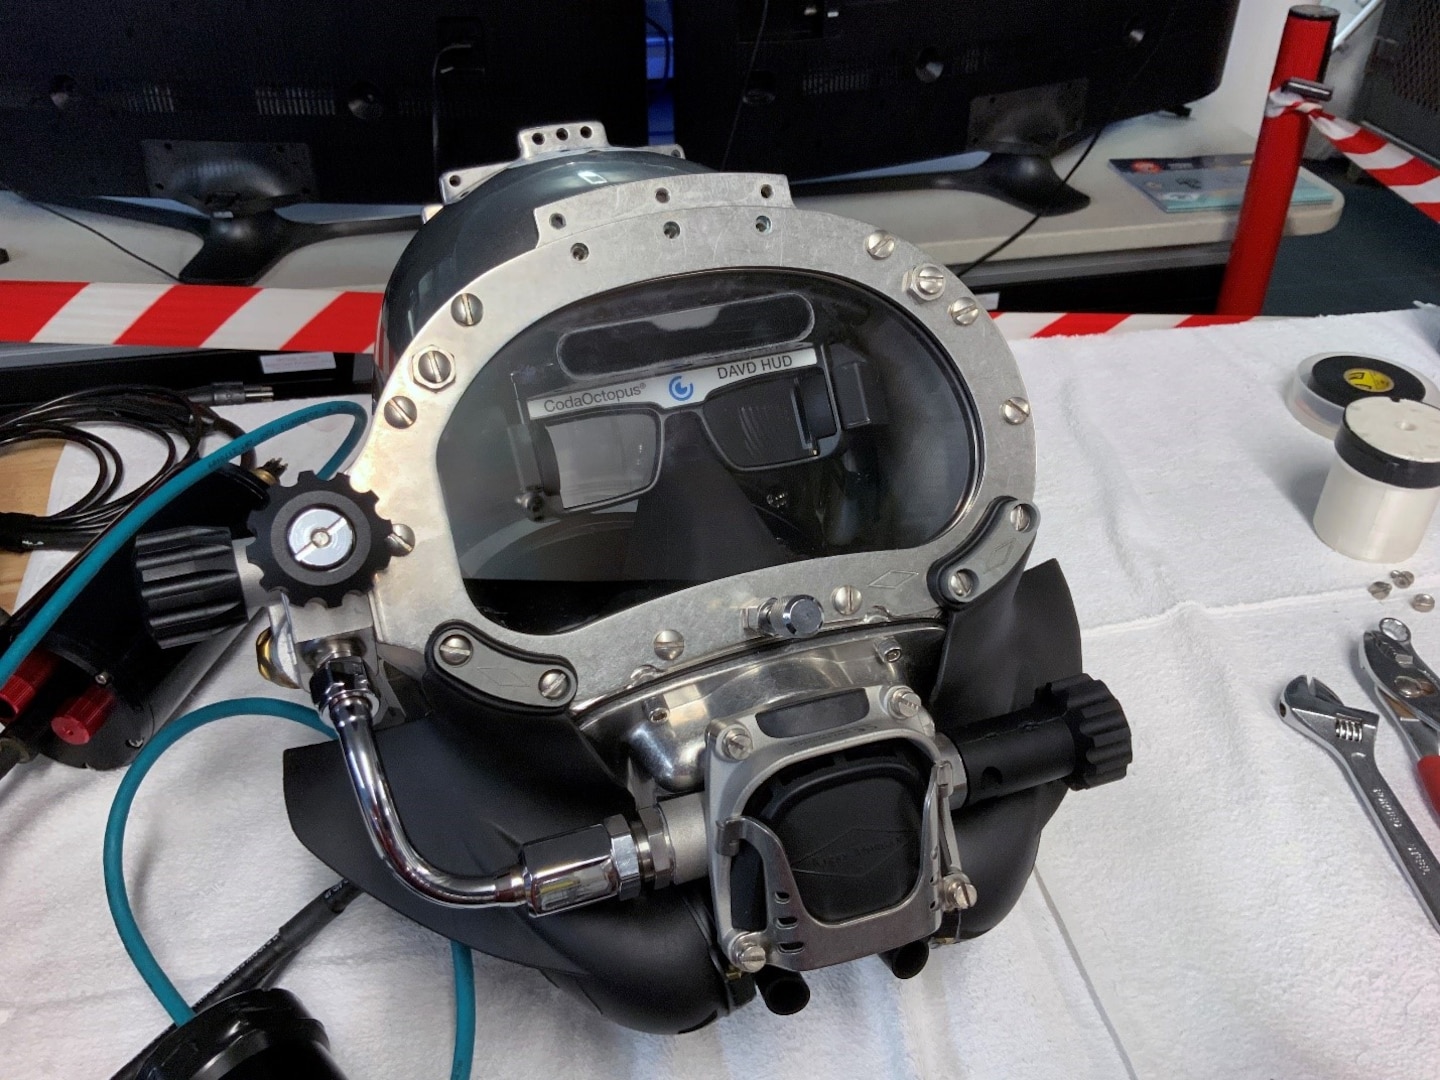 The U.S. Navy’ second-generation Diver Augmented Vision Display (DAVD) system is an evolving technology that allows divers to improve underwater task efficiency for potential use in NASA’s planned return to the moon.